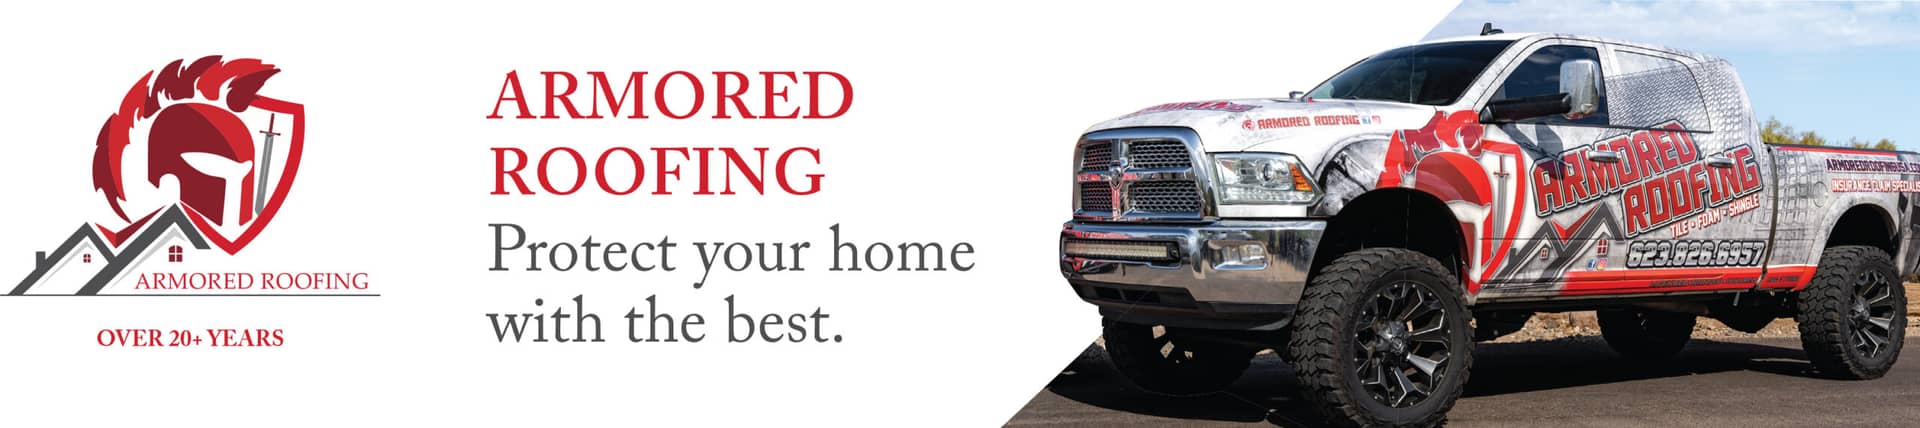 Armored Roofing | Protect your home with the best 